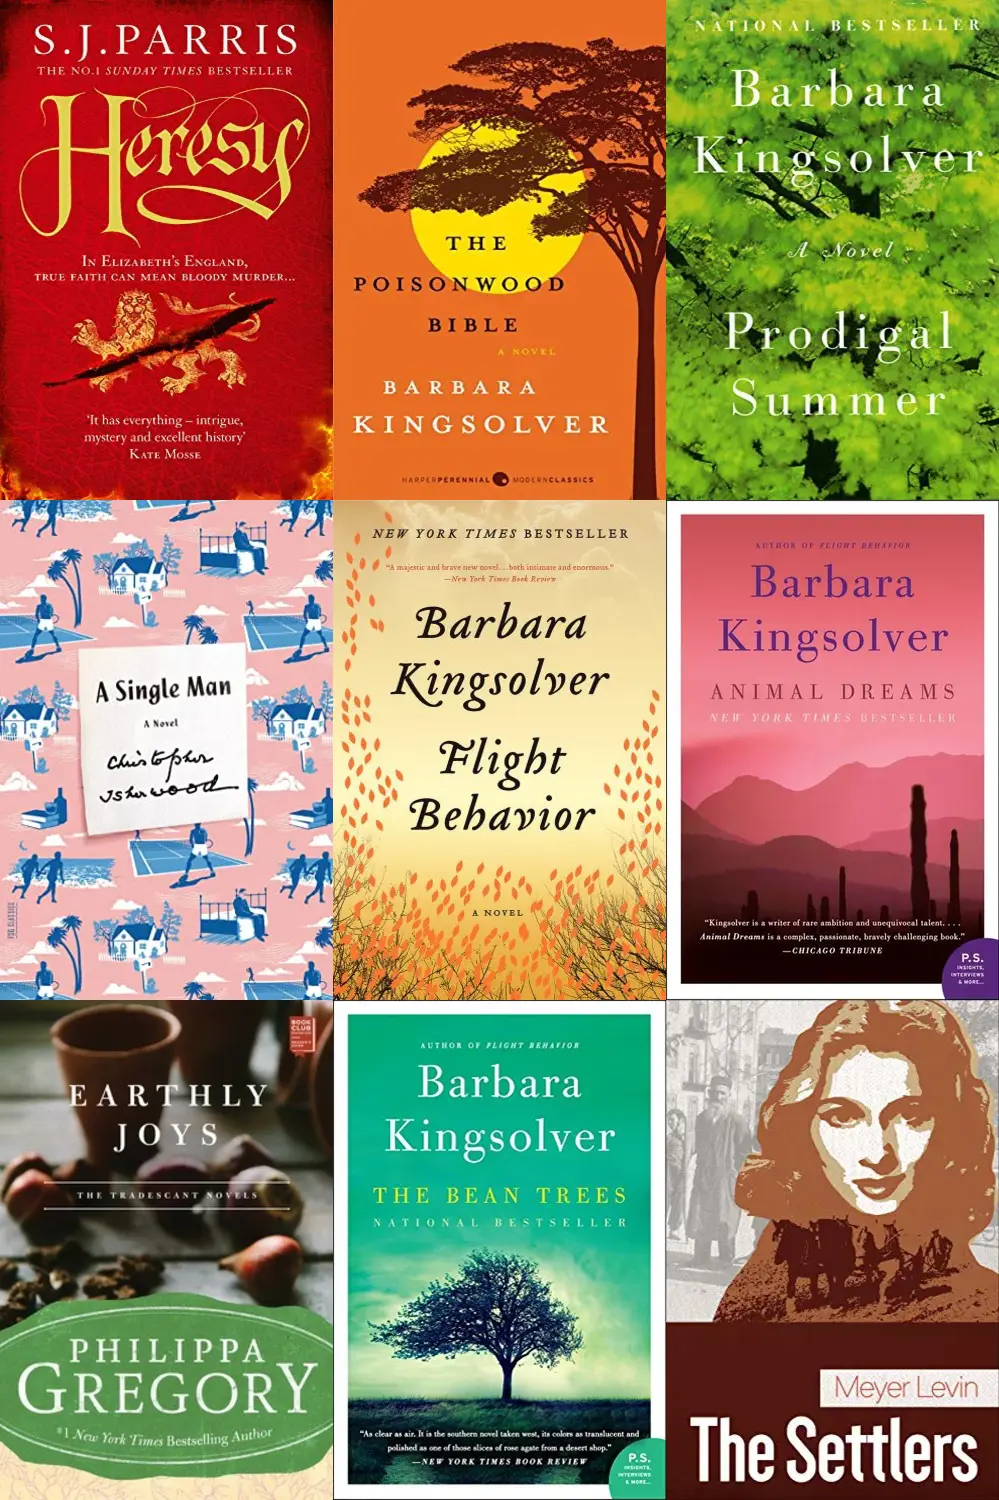 If I liked The Lacuna by Barbara Kingsolver, what should I read next?